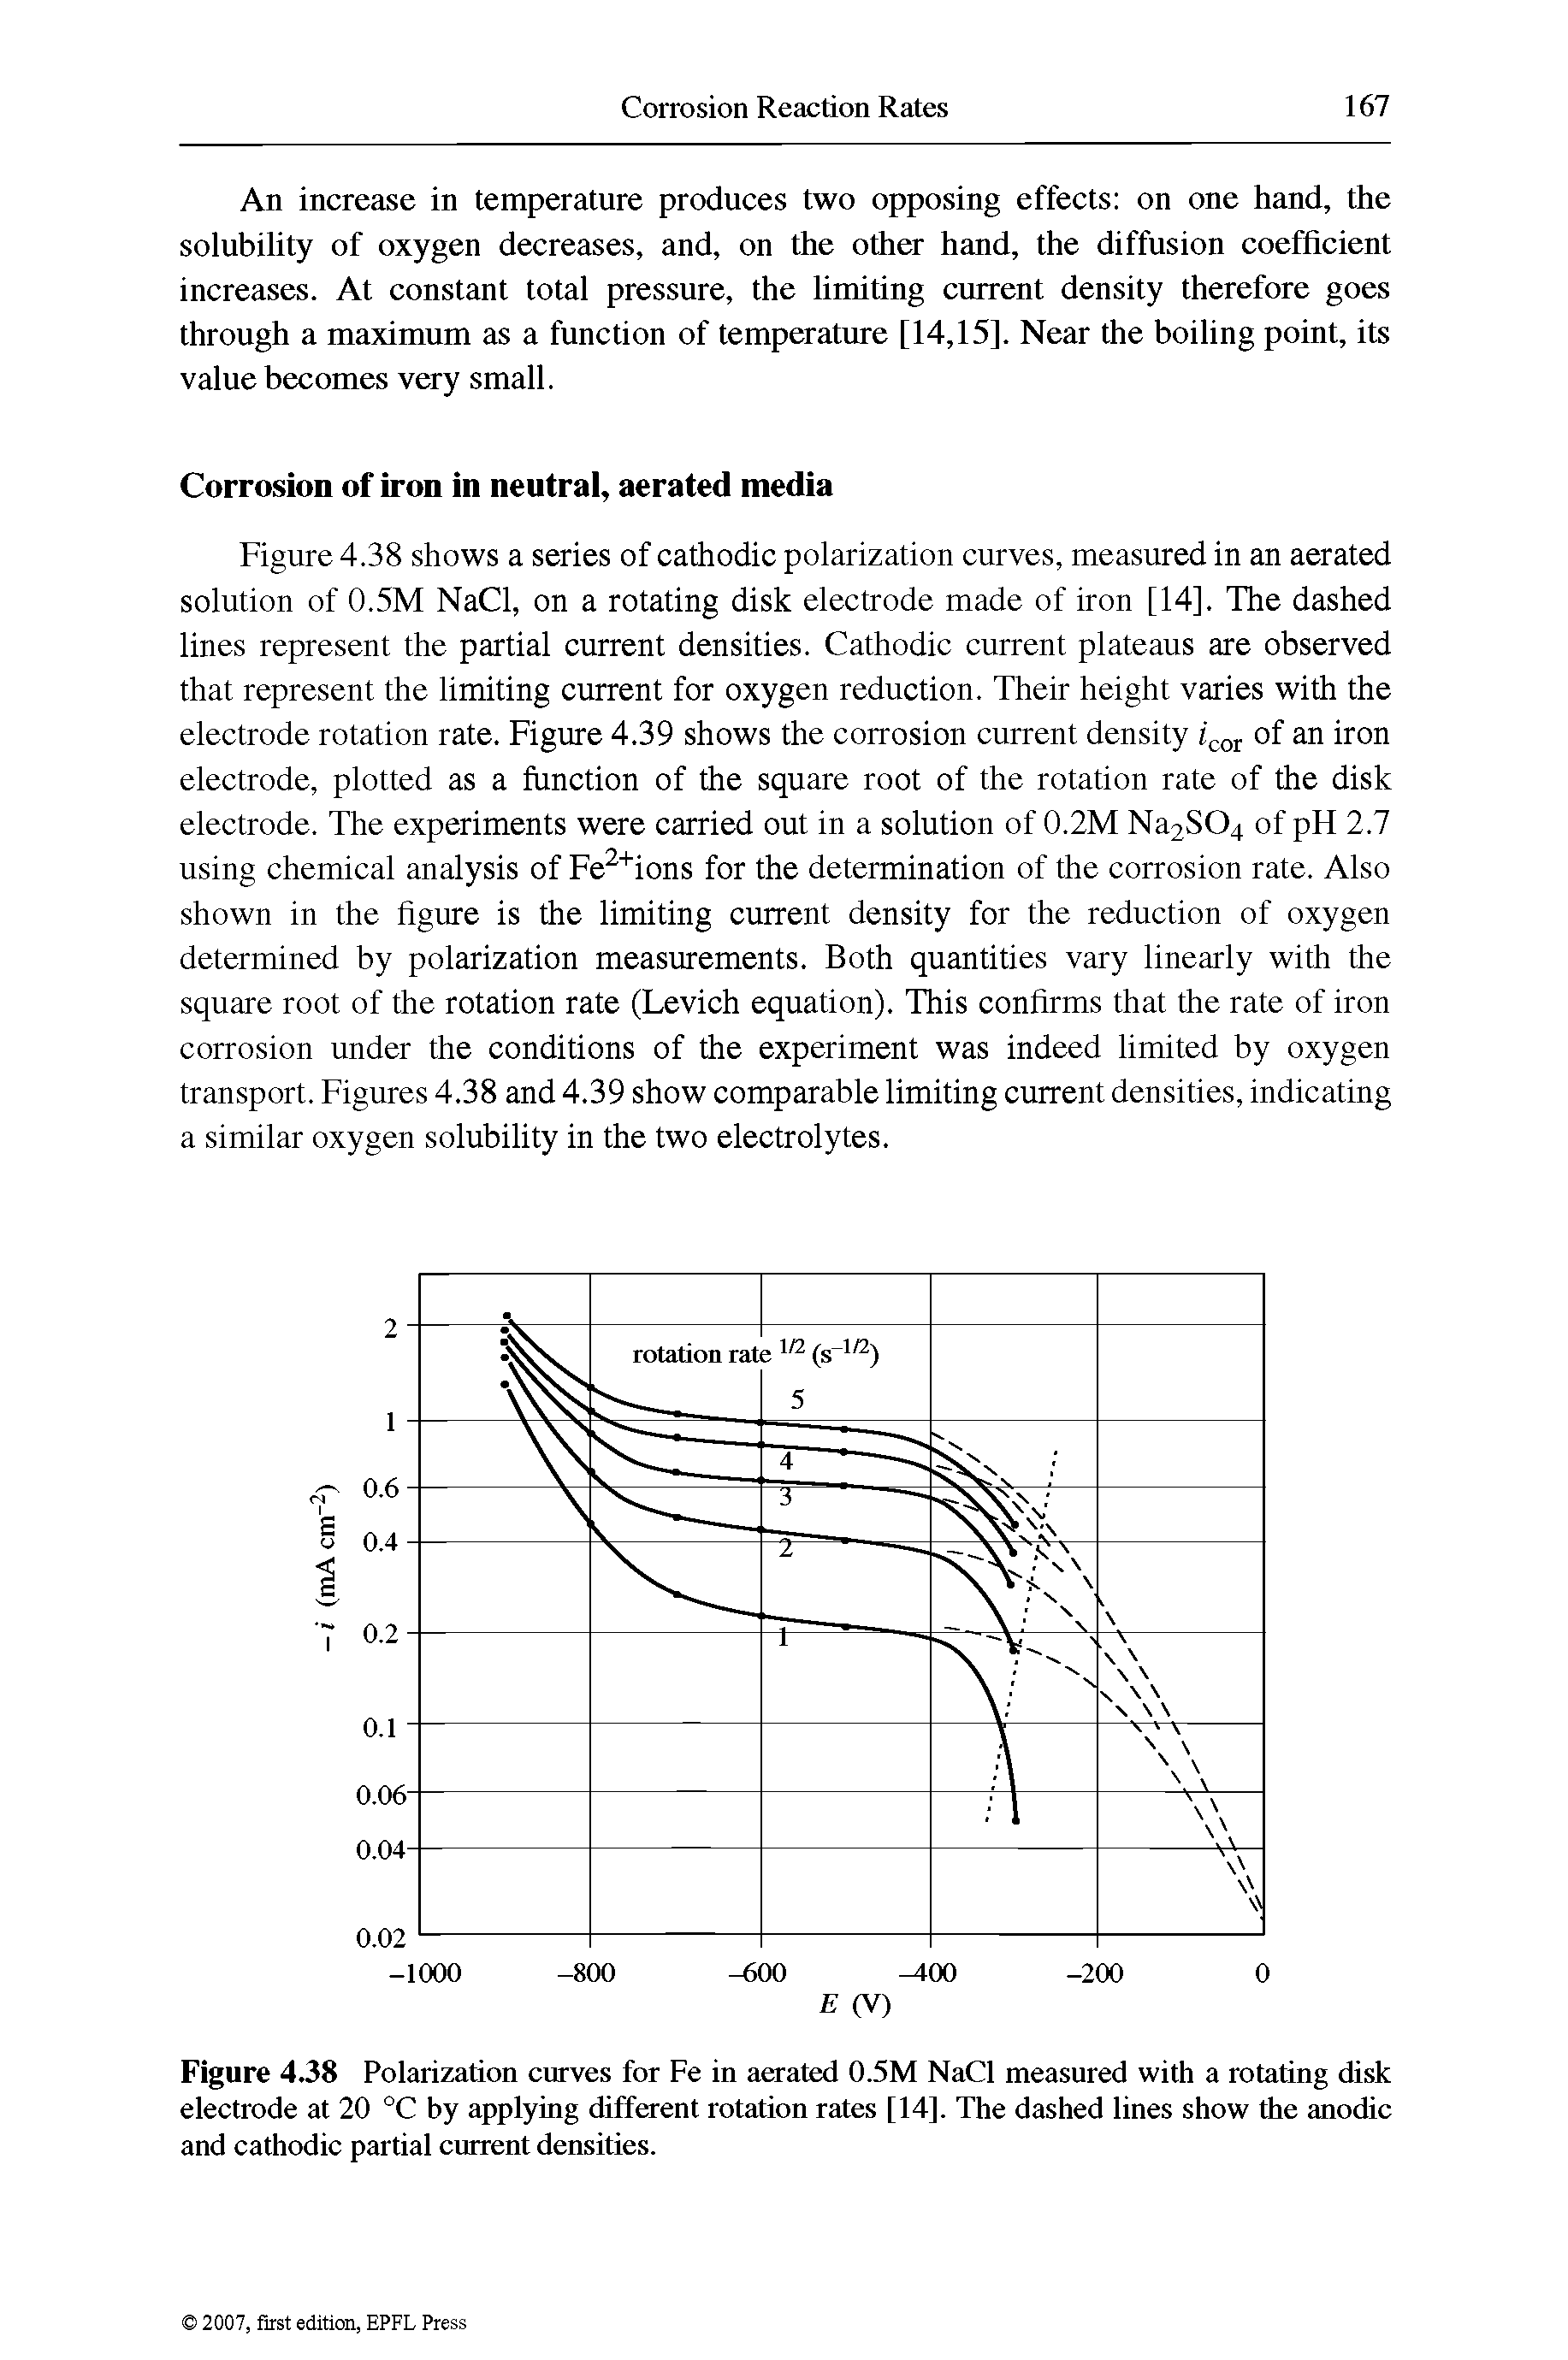 Figure 4.38 Polarization curves for Fe in aerated 0.5M NaCl measured with a rotating disk electrode at 20 °C by applying different rotation rates [14]. The dashed lines show the anodic and cathodic partial current densities.